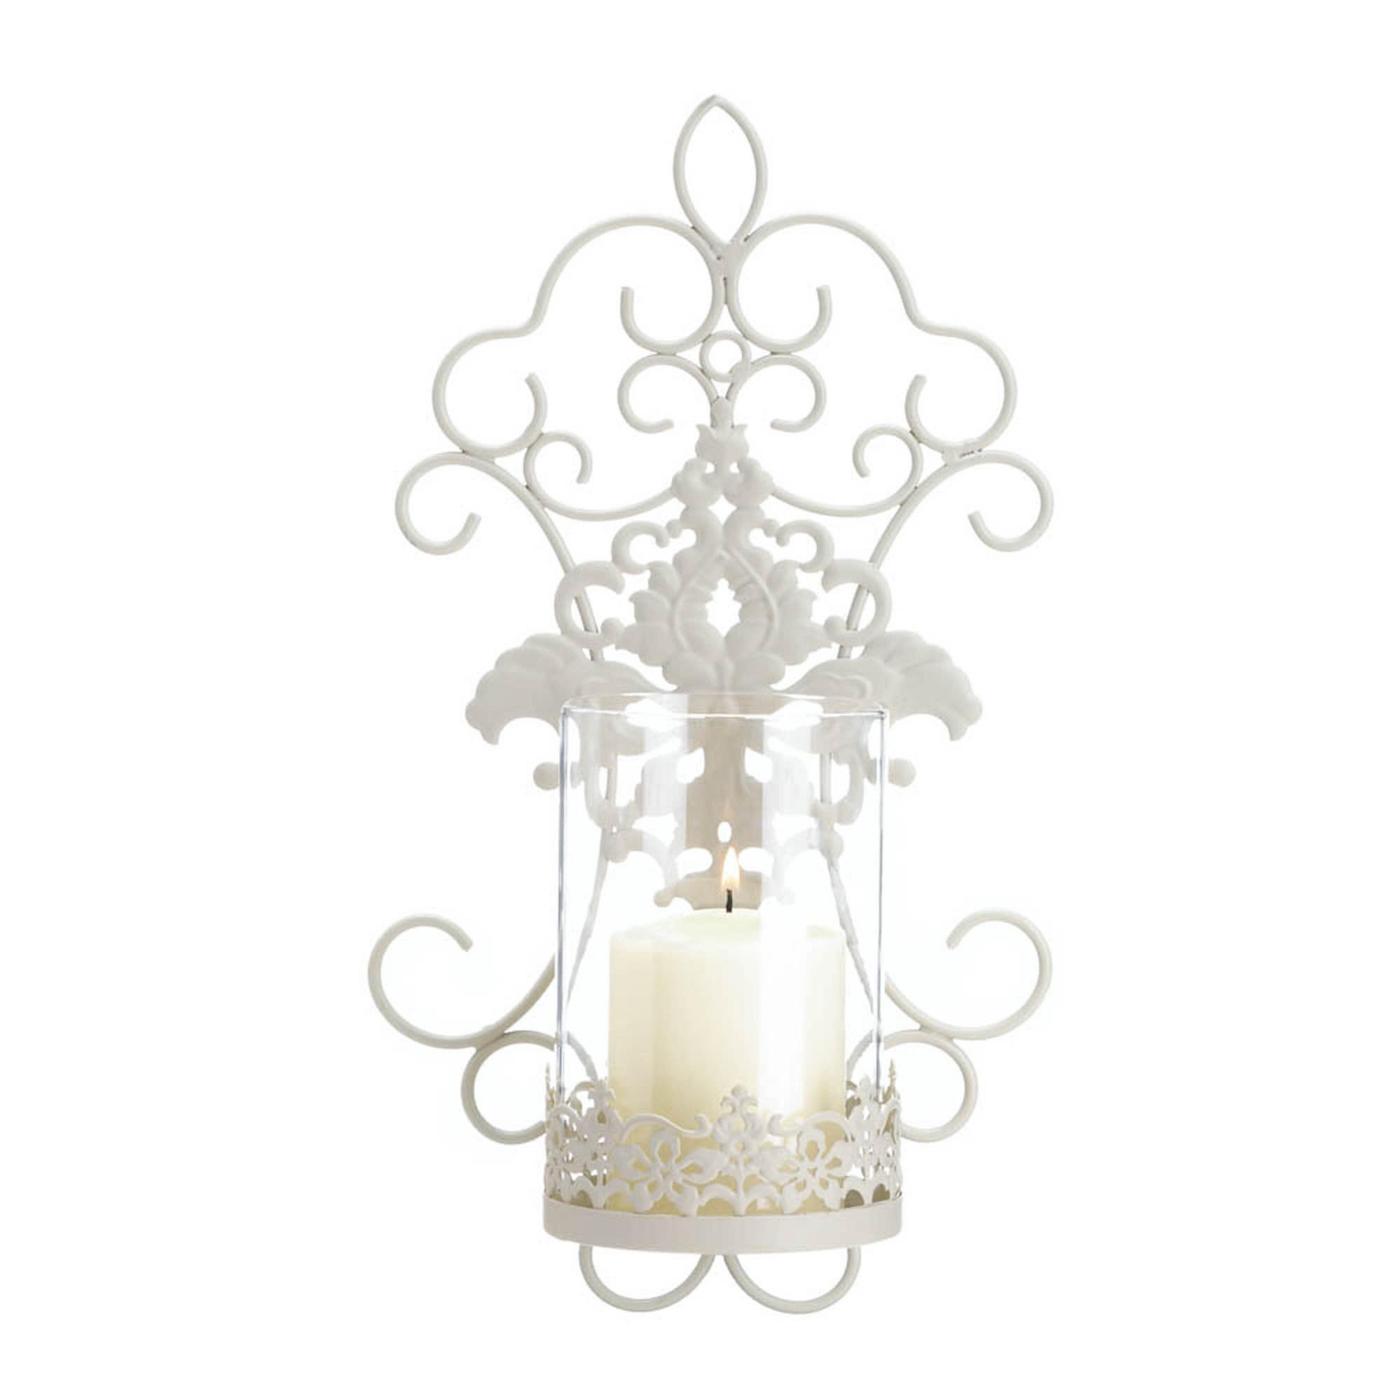 Romantic Lace Wall Sconce